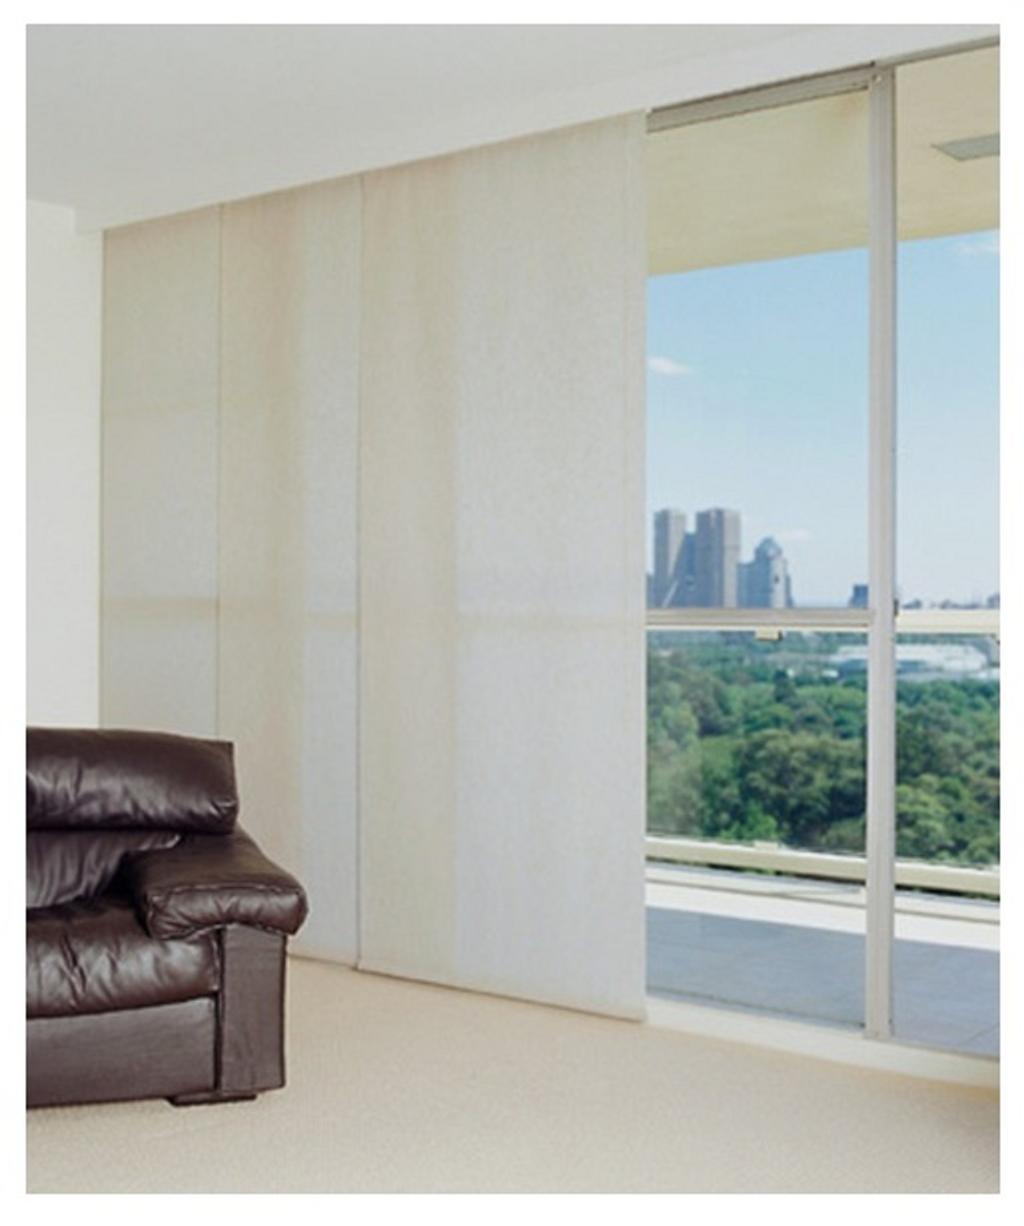 Glide Panel Blinds Glide blinds are made up of panels of fabric.